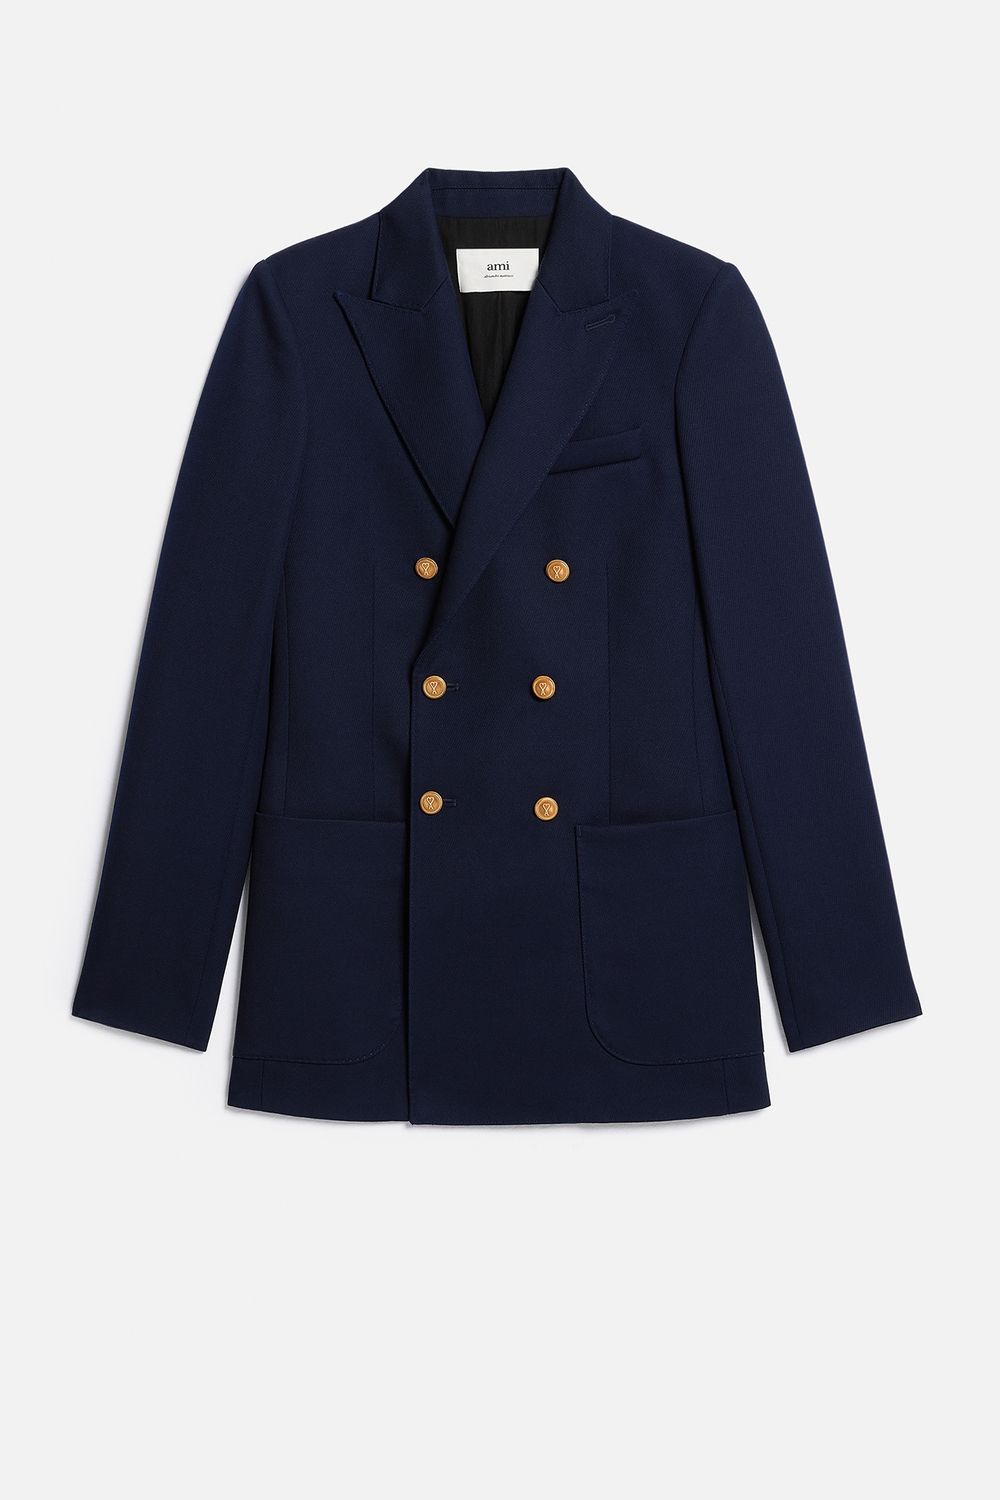 AMI ALEXANDRE MATTIUSSI DOUBLE BREASTED JACKET BLUE FOR WOMEN